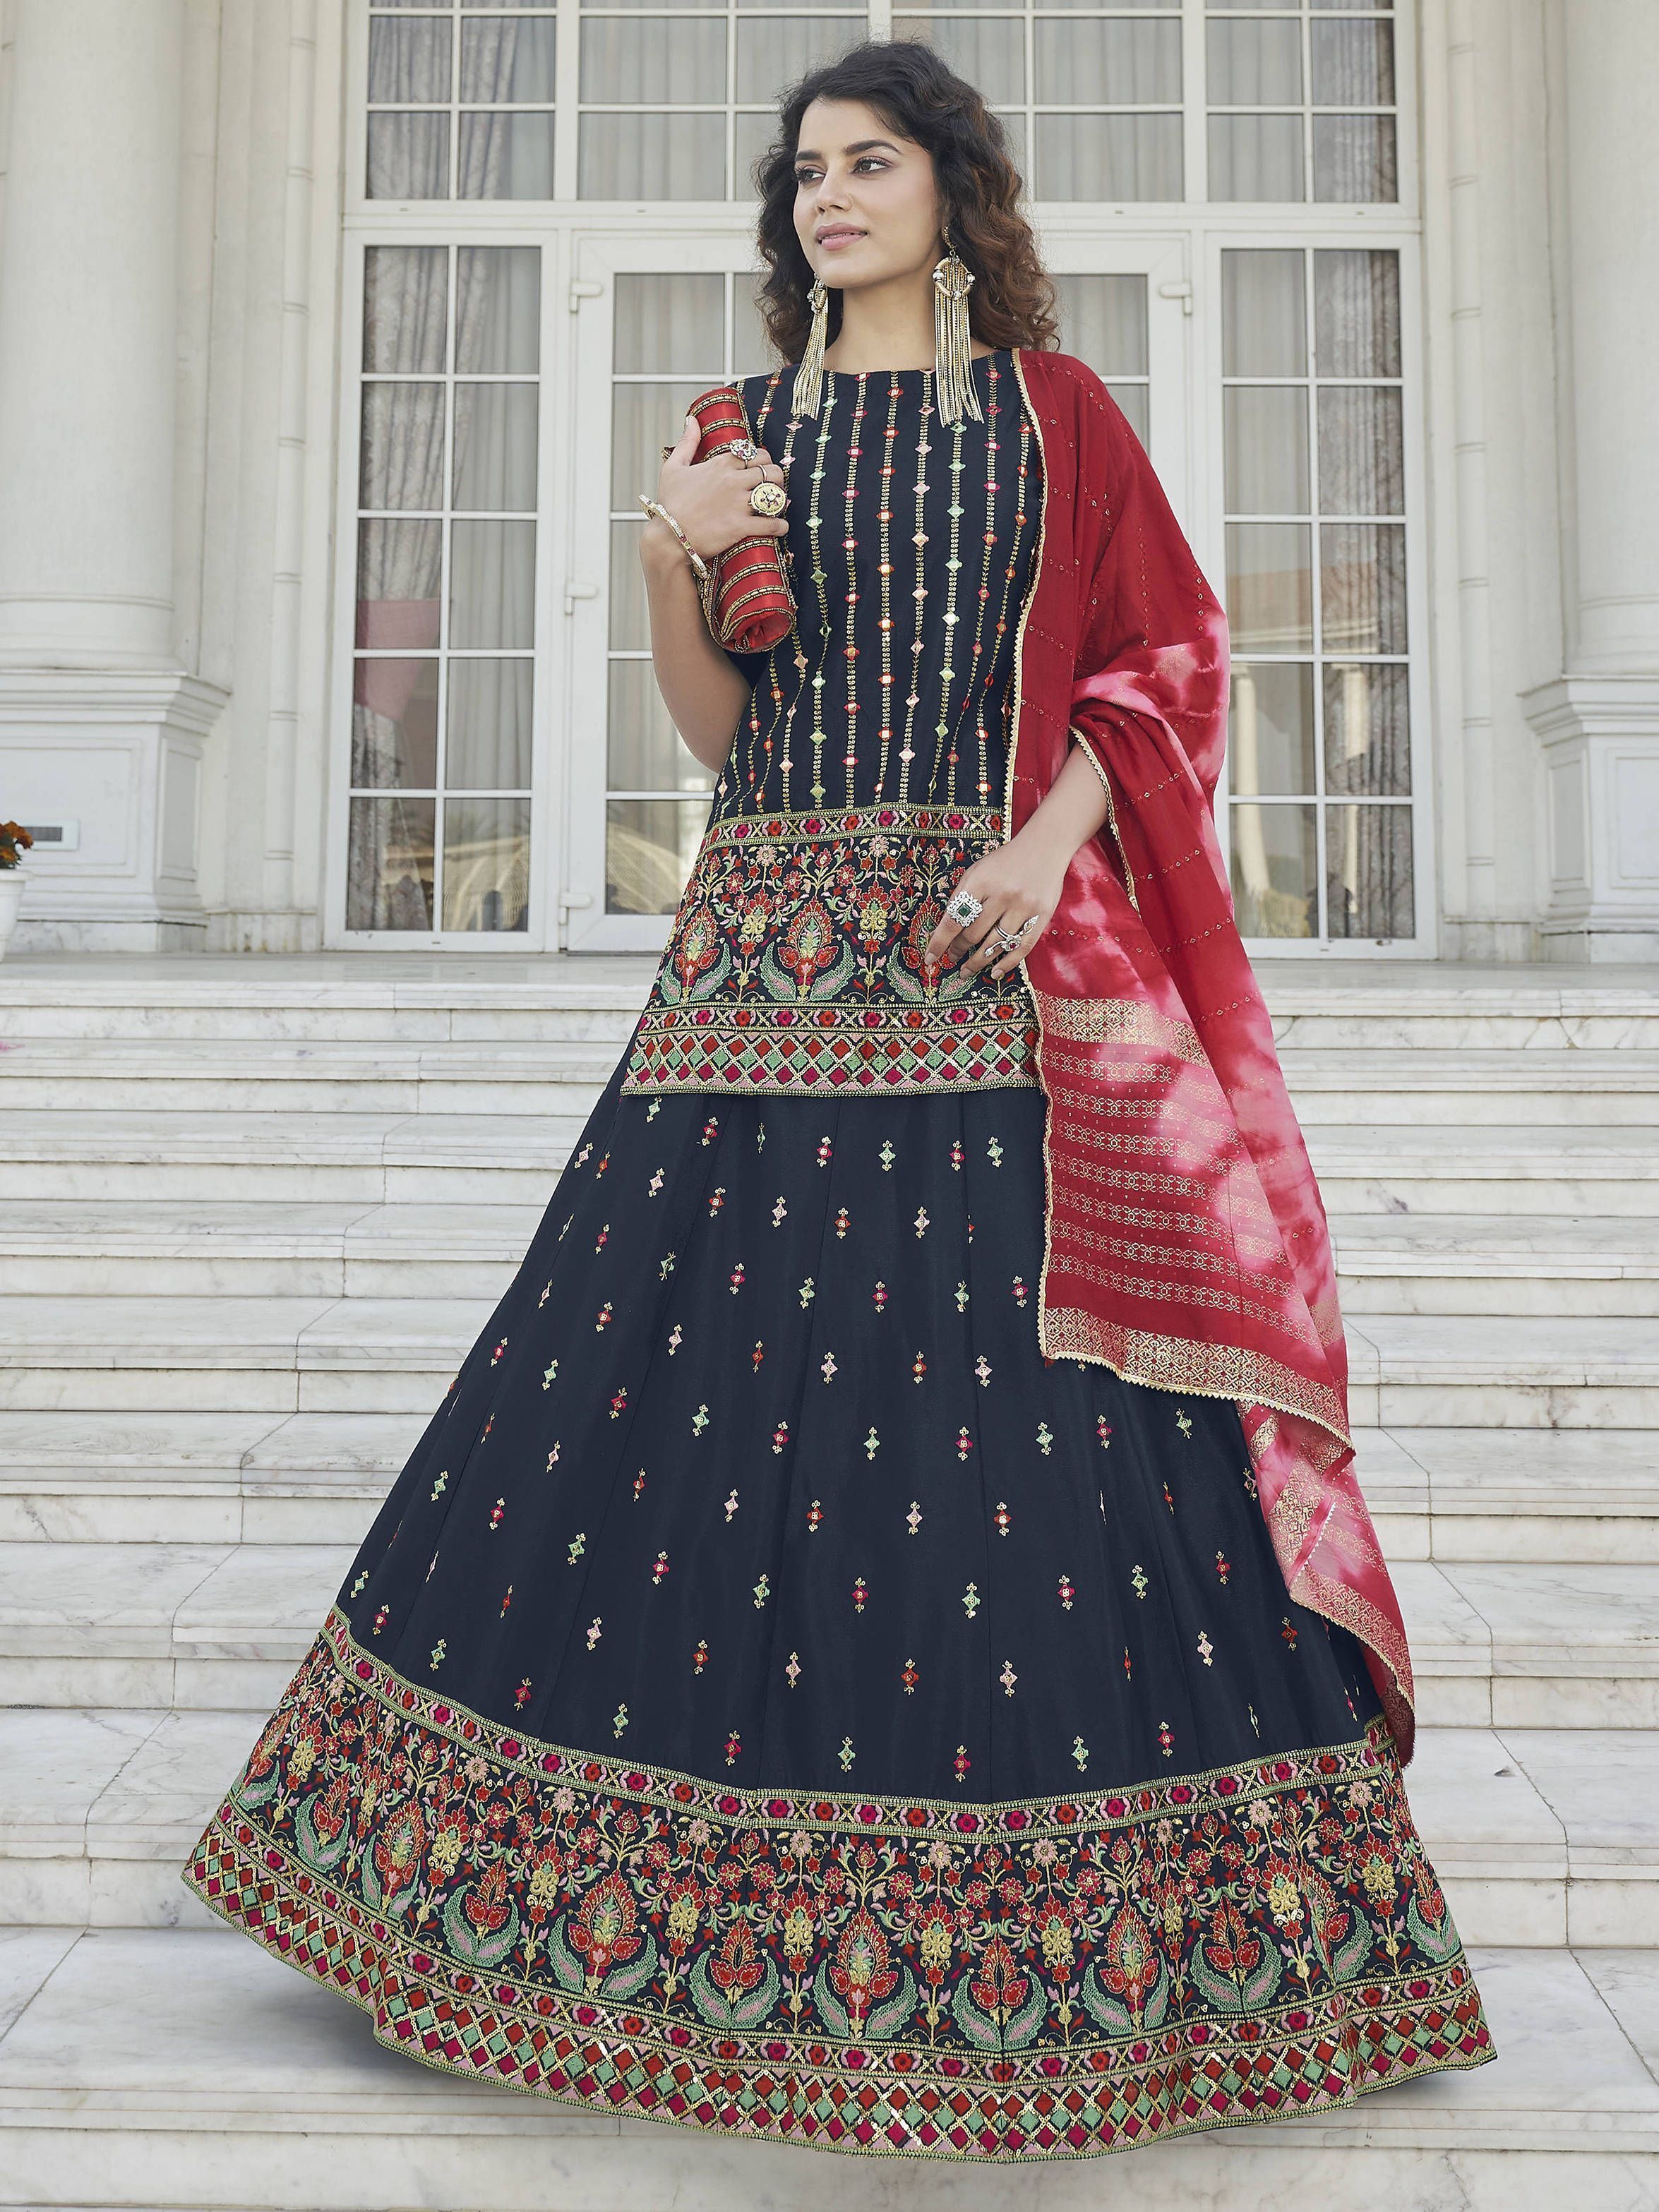 How To Wear Lehenga In Winter: 6 Tips For Styling - The Kosha Journal